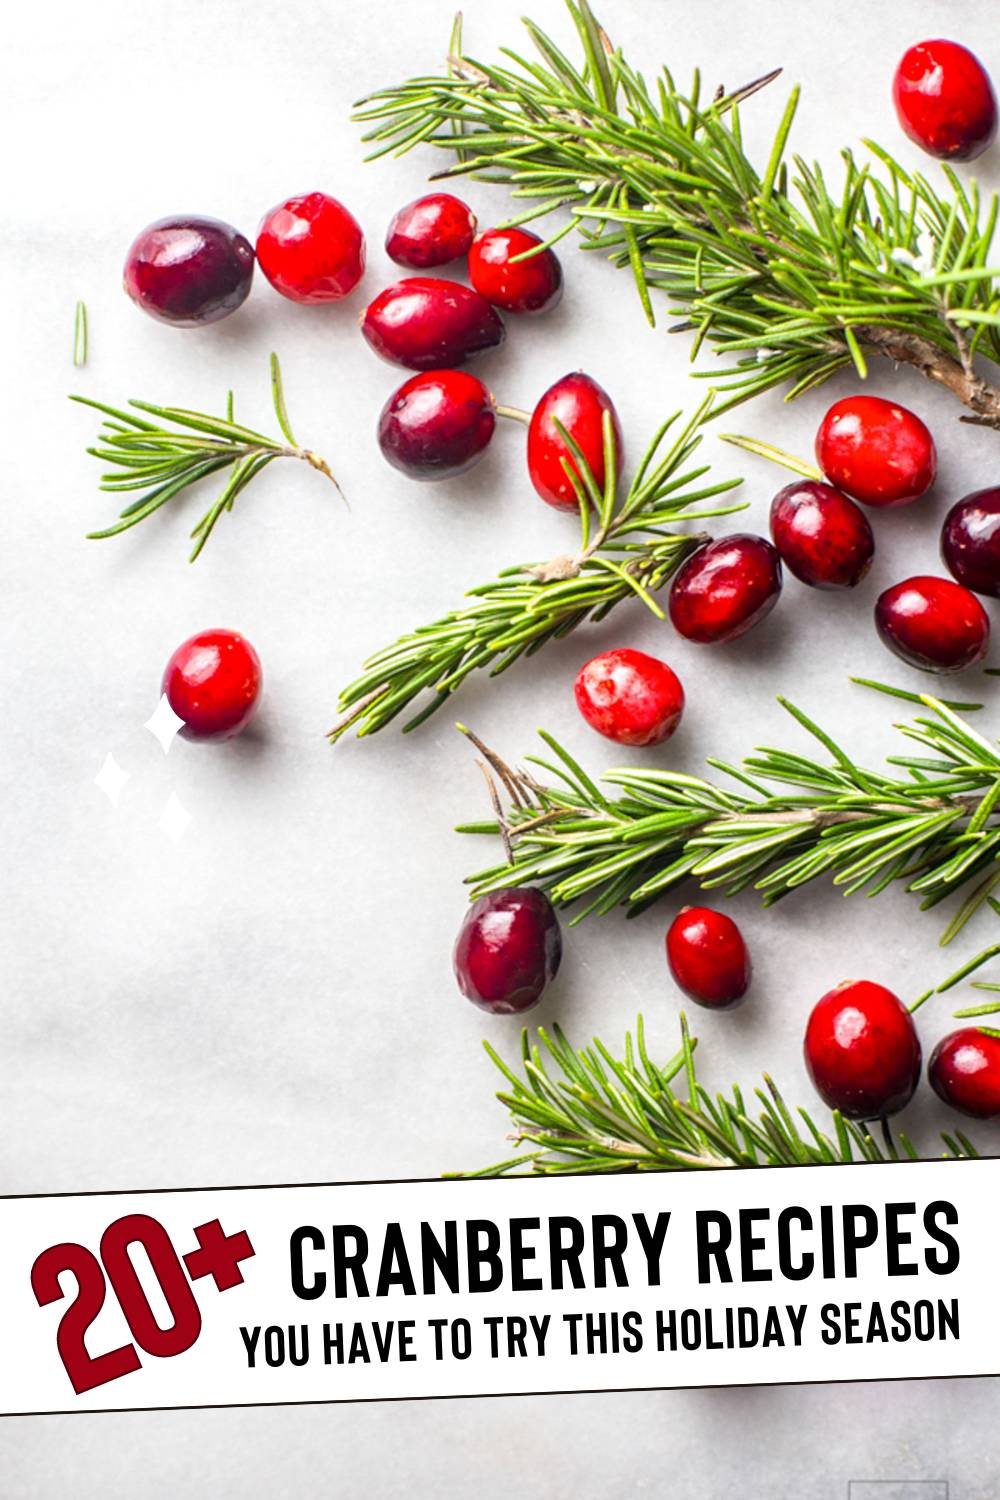 Pin graphic for cranberry recipes roundup.